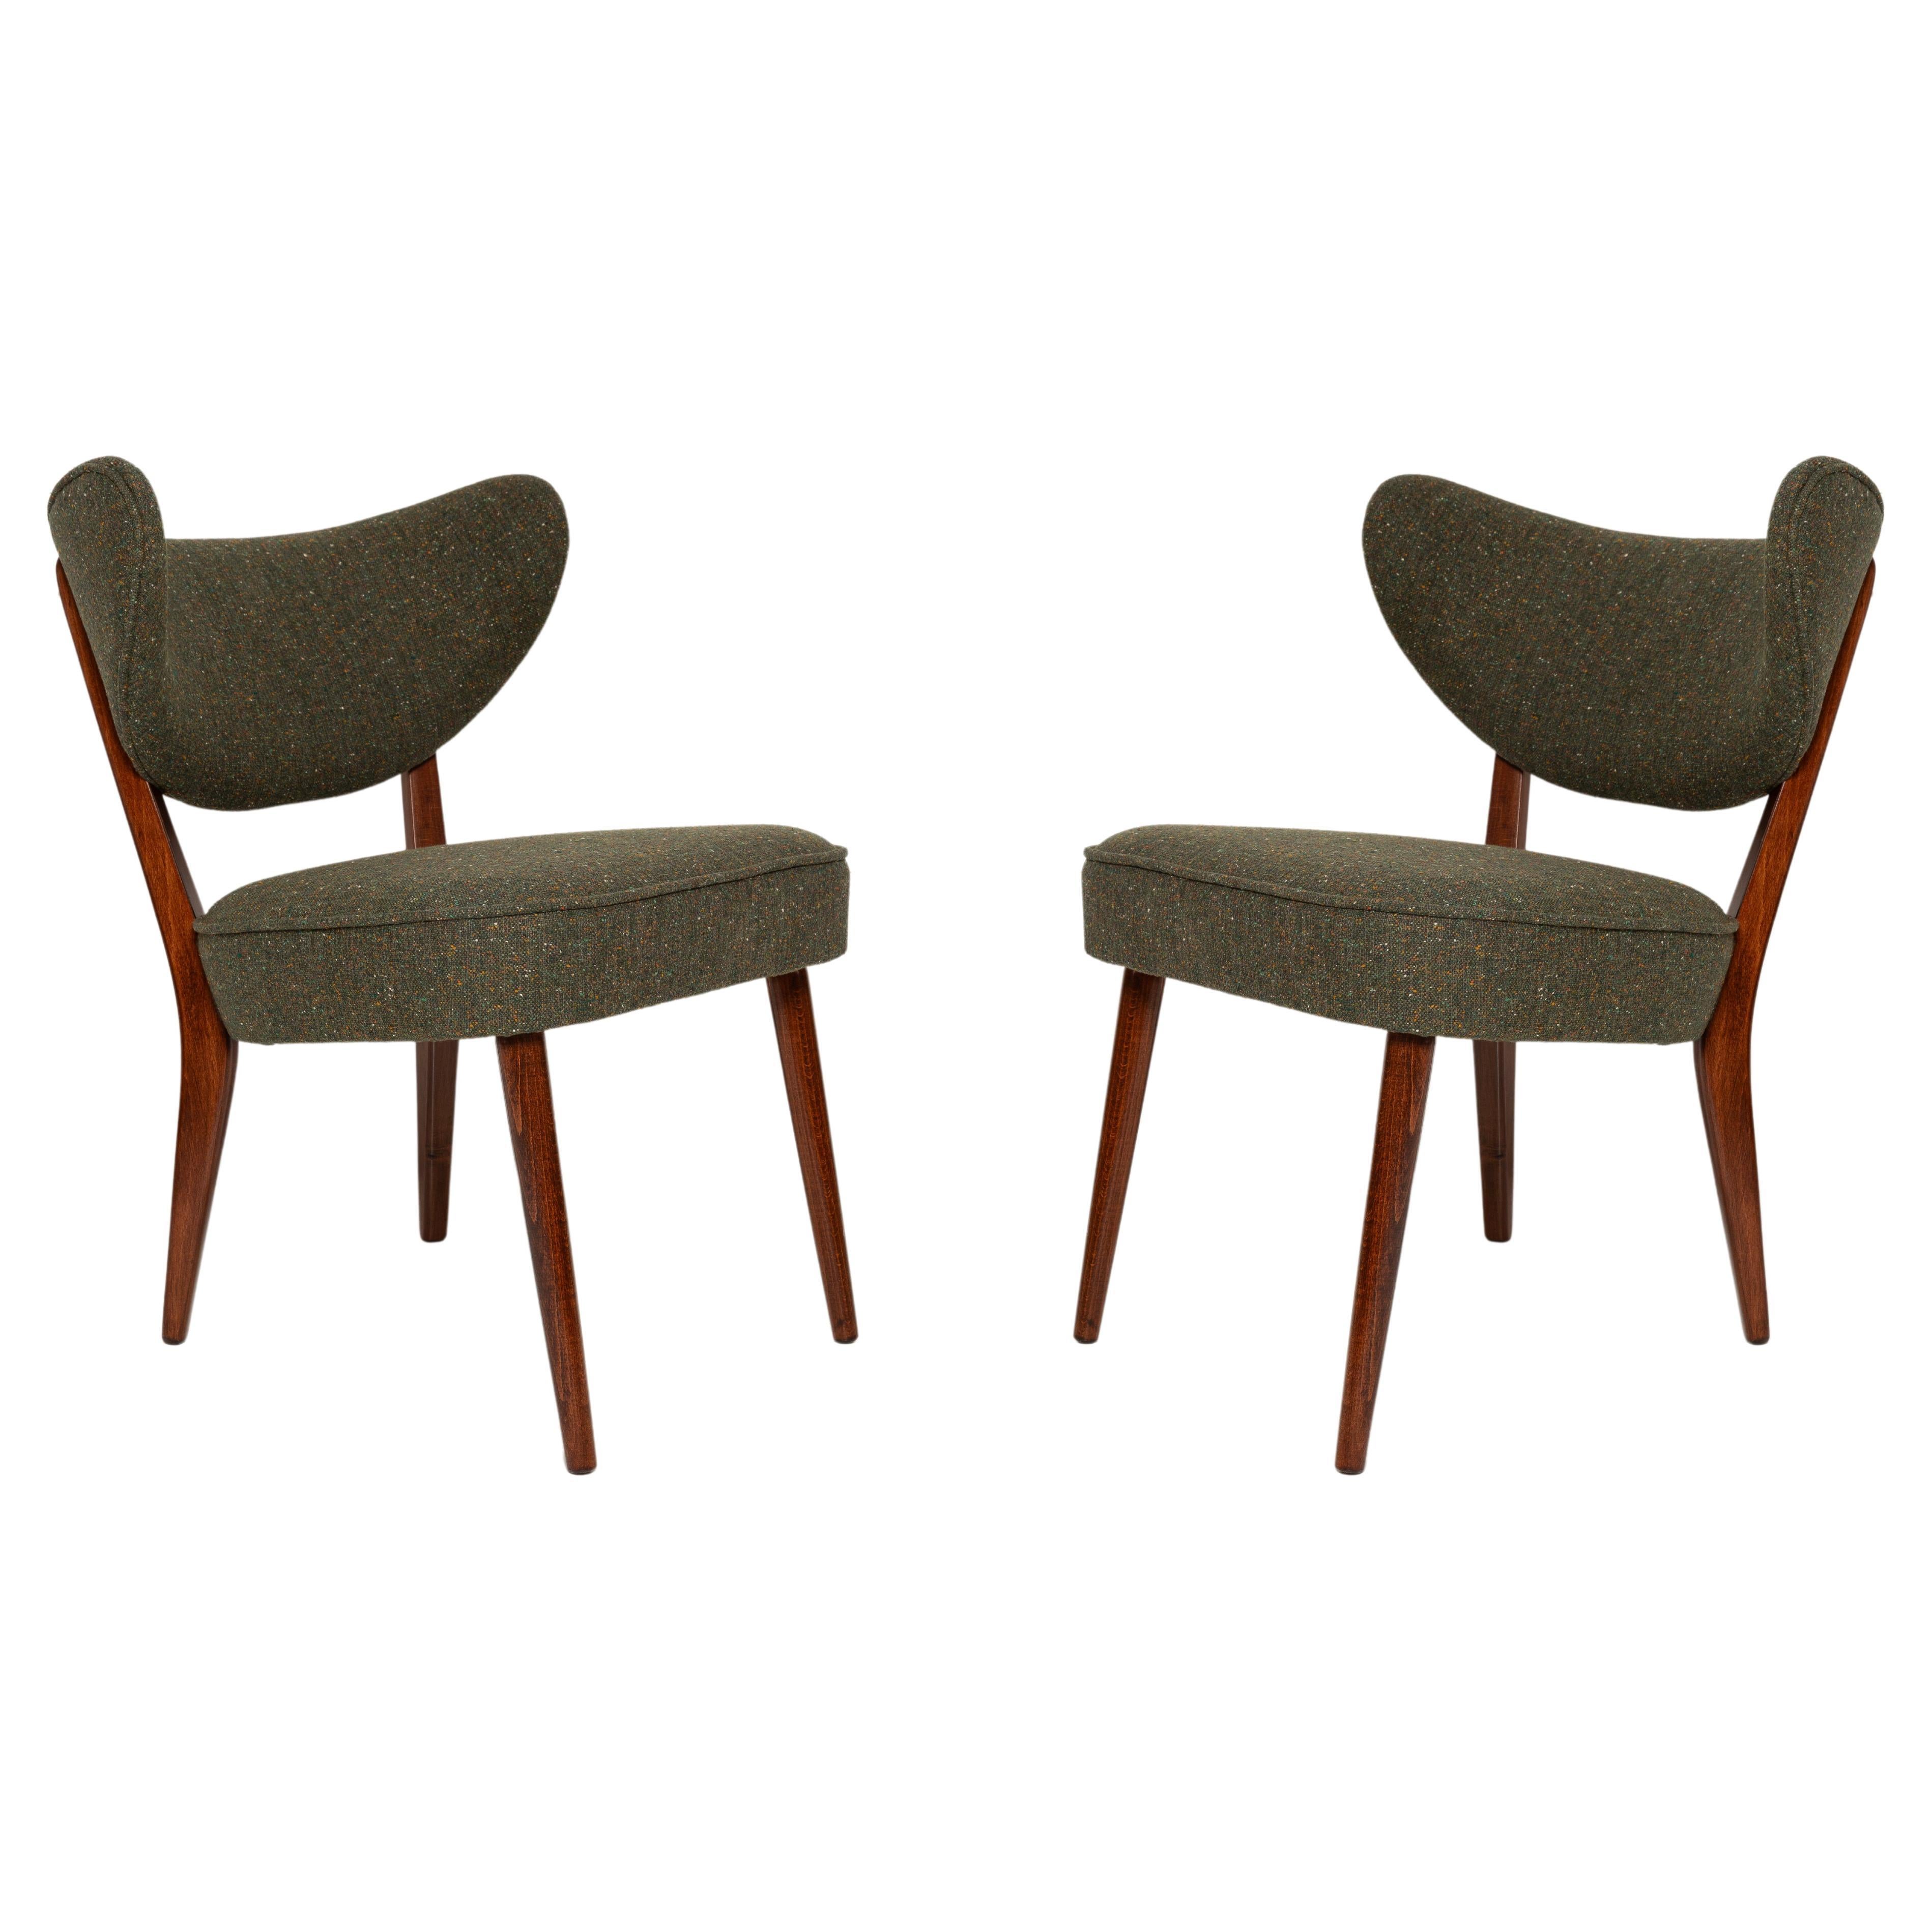 Pair of Green Wool Shell Club Chairs, by Vintola Studio, Europe, Poland